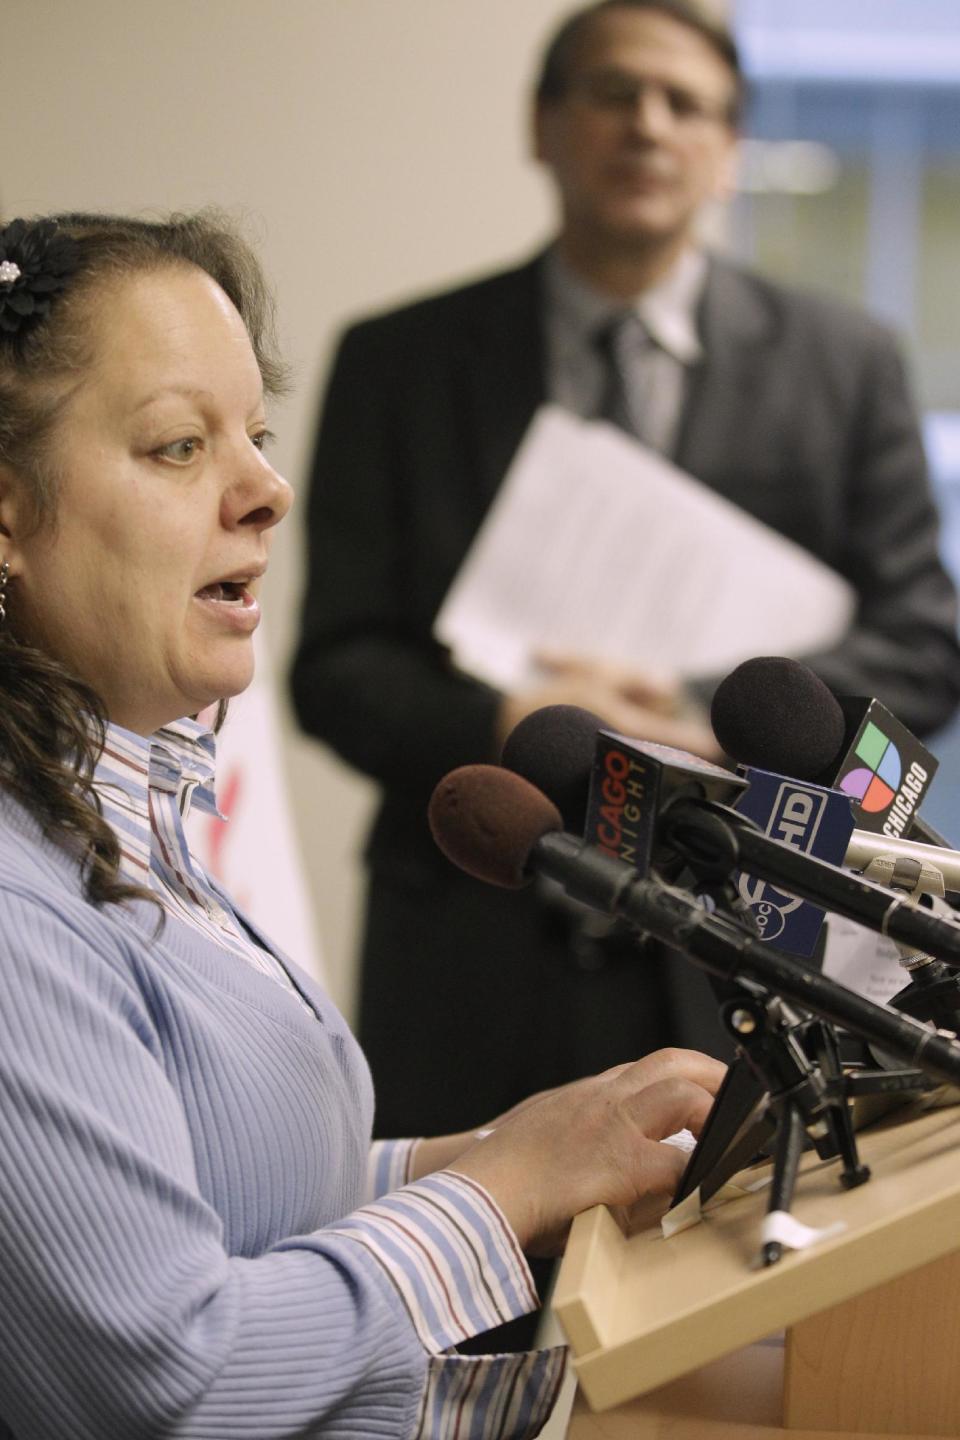 Ramona Ortiz-Patino, one of two former patients of Swedish Covenant Hospital who are now plaintiffs in a lawsuit against the health care facility speaks at a news conference accompanied by attoreny Alan Alop, right, of the legal services group LAF, Thursday, Nov. 29, 2012 in Chicago. The lawsuit claims that the nonprofit hospital failed to provide charity care to low-income uninsured patients which is required by law in exchange for state tax break benefits. (AP Photo/M. Spencer Green)